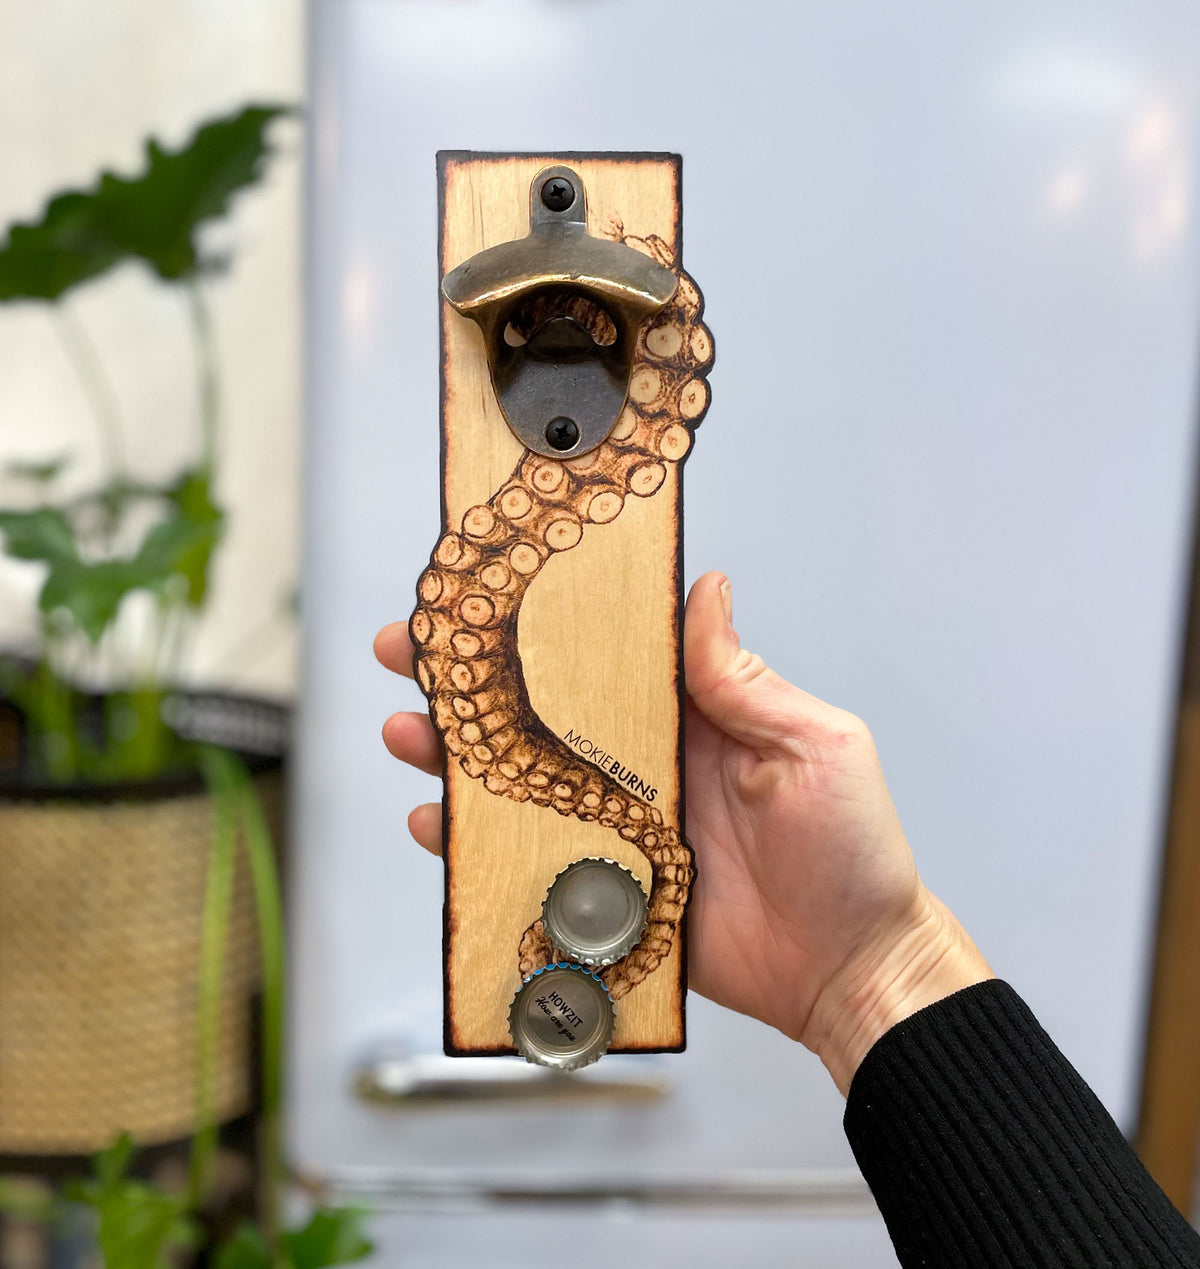 KRAKEN a Cold One - Octopus Tentacle Magnetic Bottle Opener for Fridge, Grill, or Any Magnetic Surface